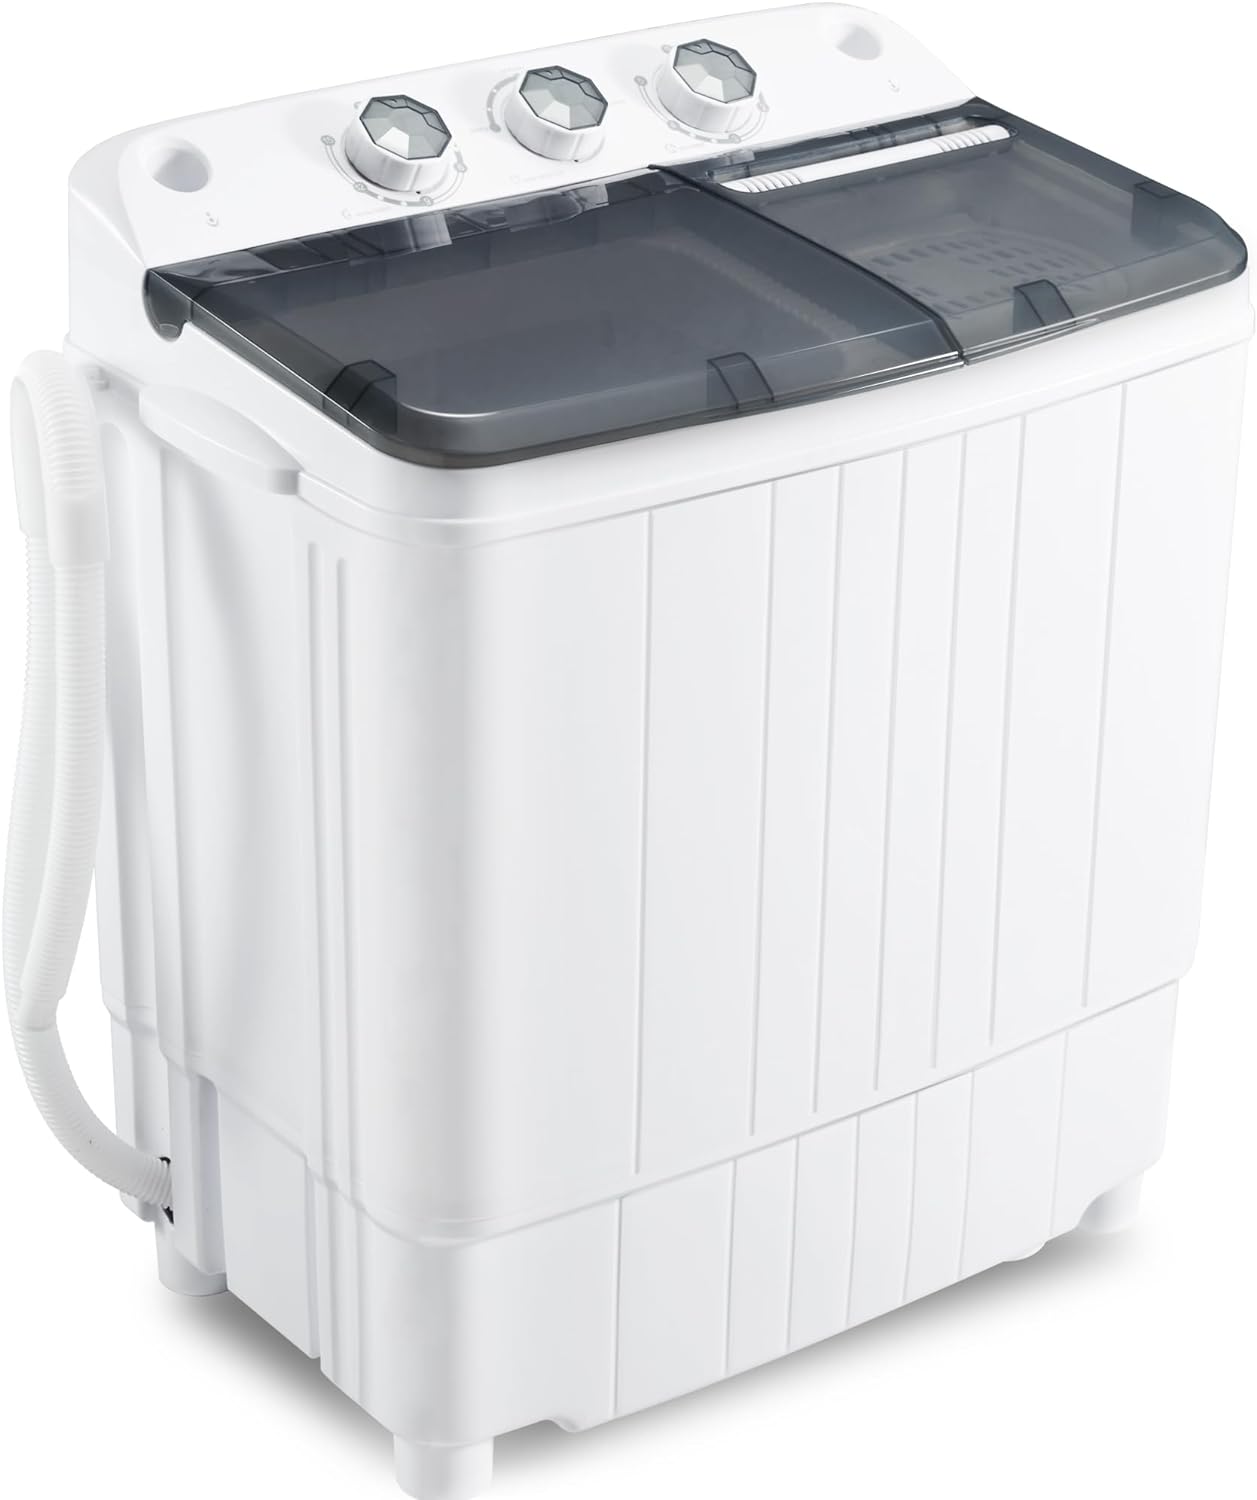 Portable Washing machine 17.6Lbs Capacity Mini Washer and Dryer Combo Compact Twin Tub Laundry Washer(11.6Lbs) & Spinner(6Lbs) Built-in Gravity Drain,Low Noise for Apartment,Dorms,RV Camping, GREY